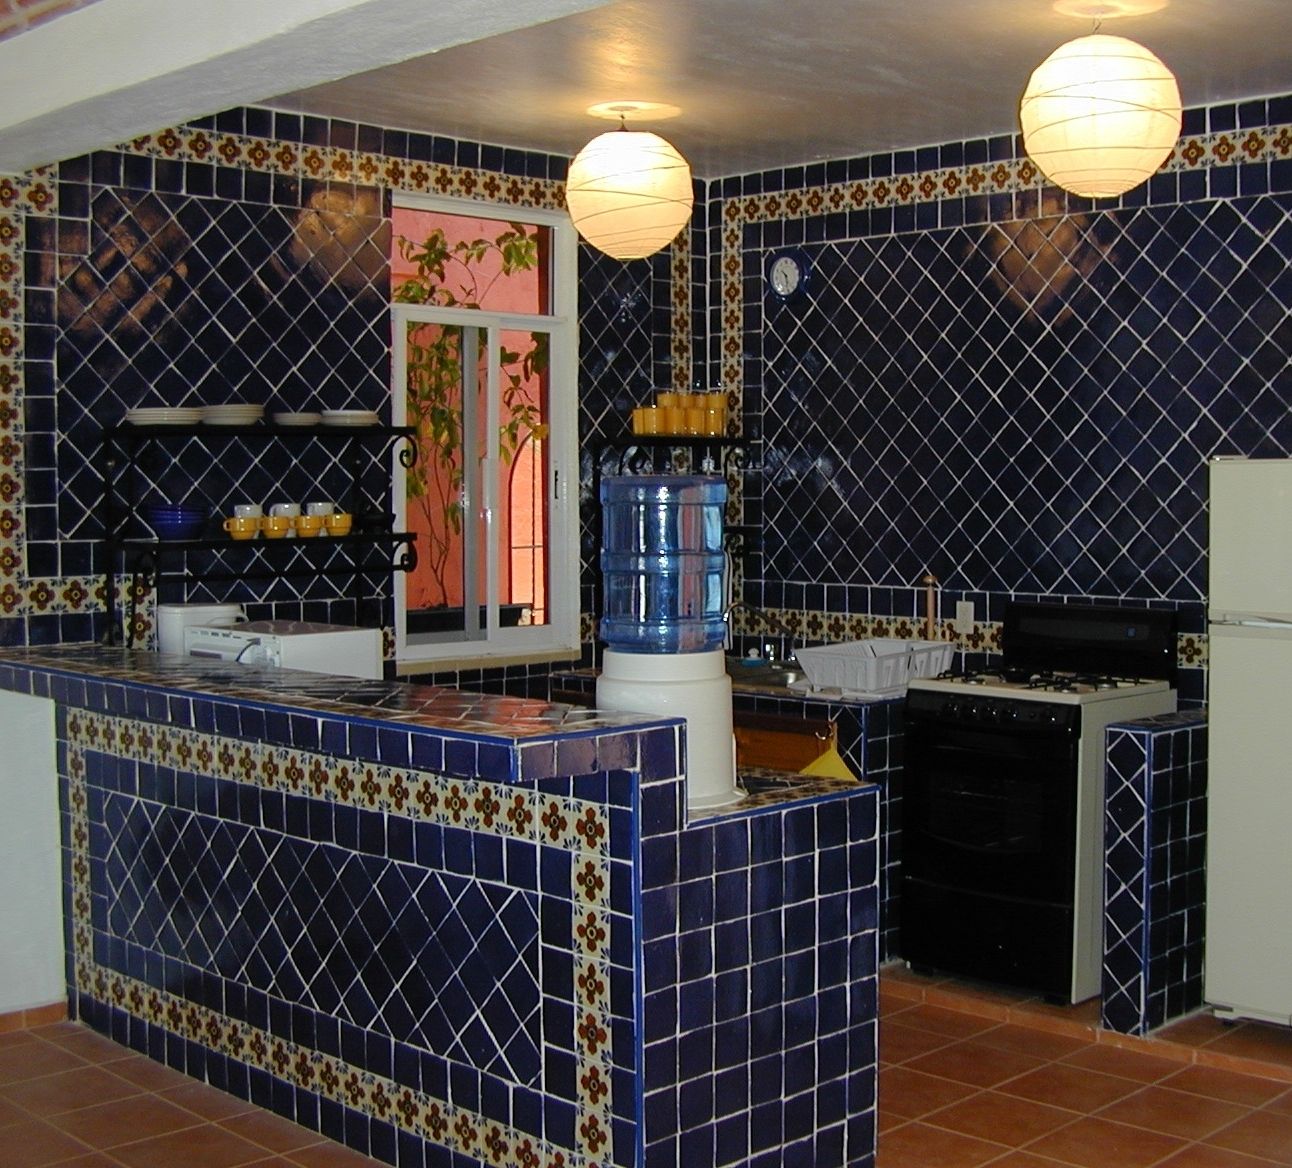 Mexican Themed Kitchen With Mosaic Tile (View 6 of 10)